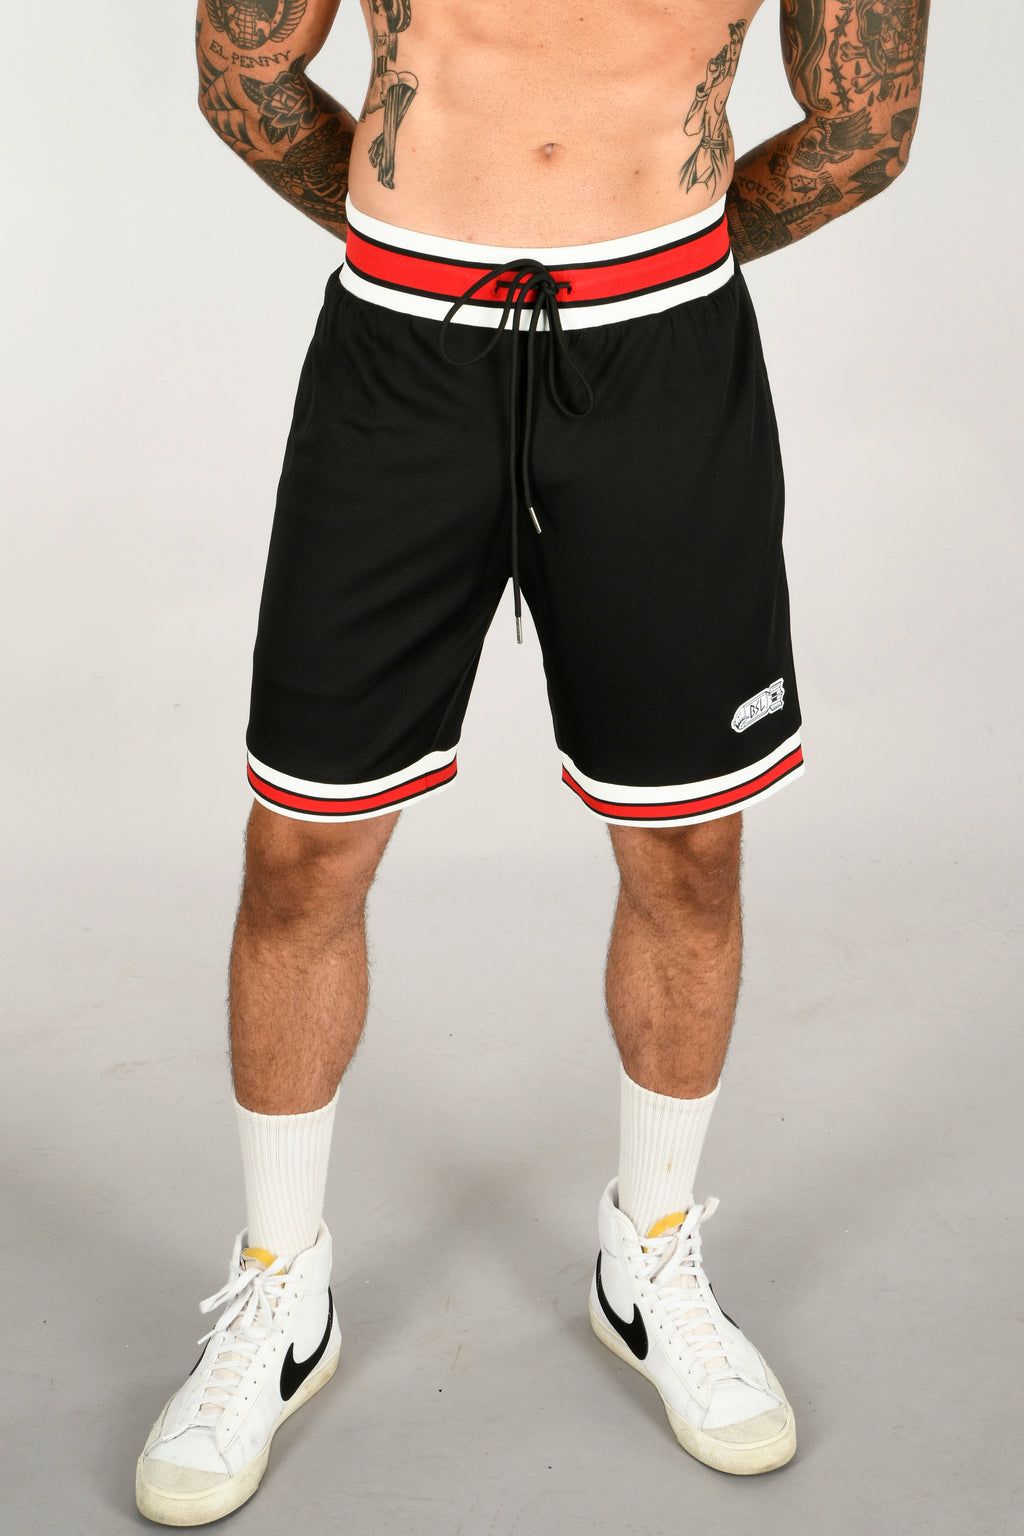 BSL Swolls Basketball Jersey Shorts BSL102 - Red – DomMerch